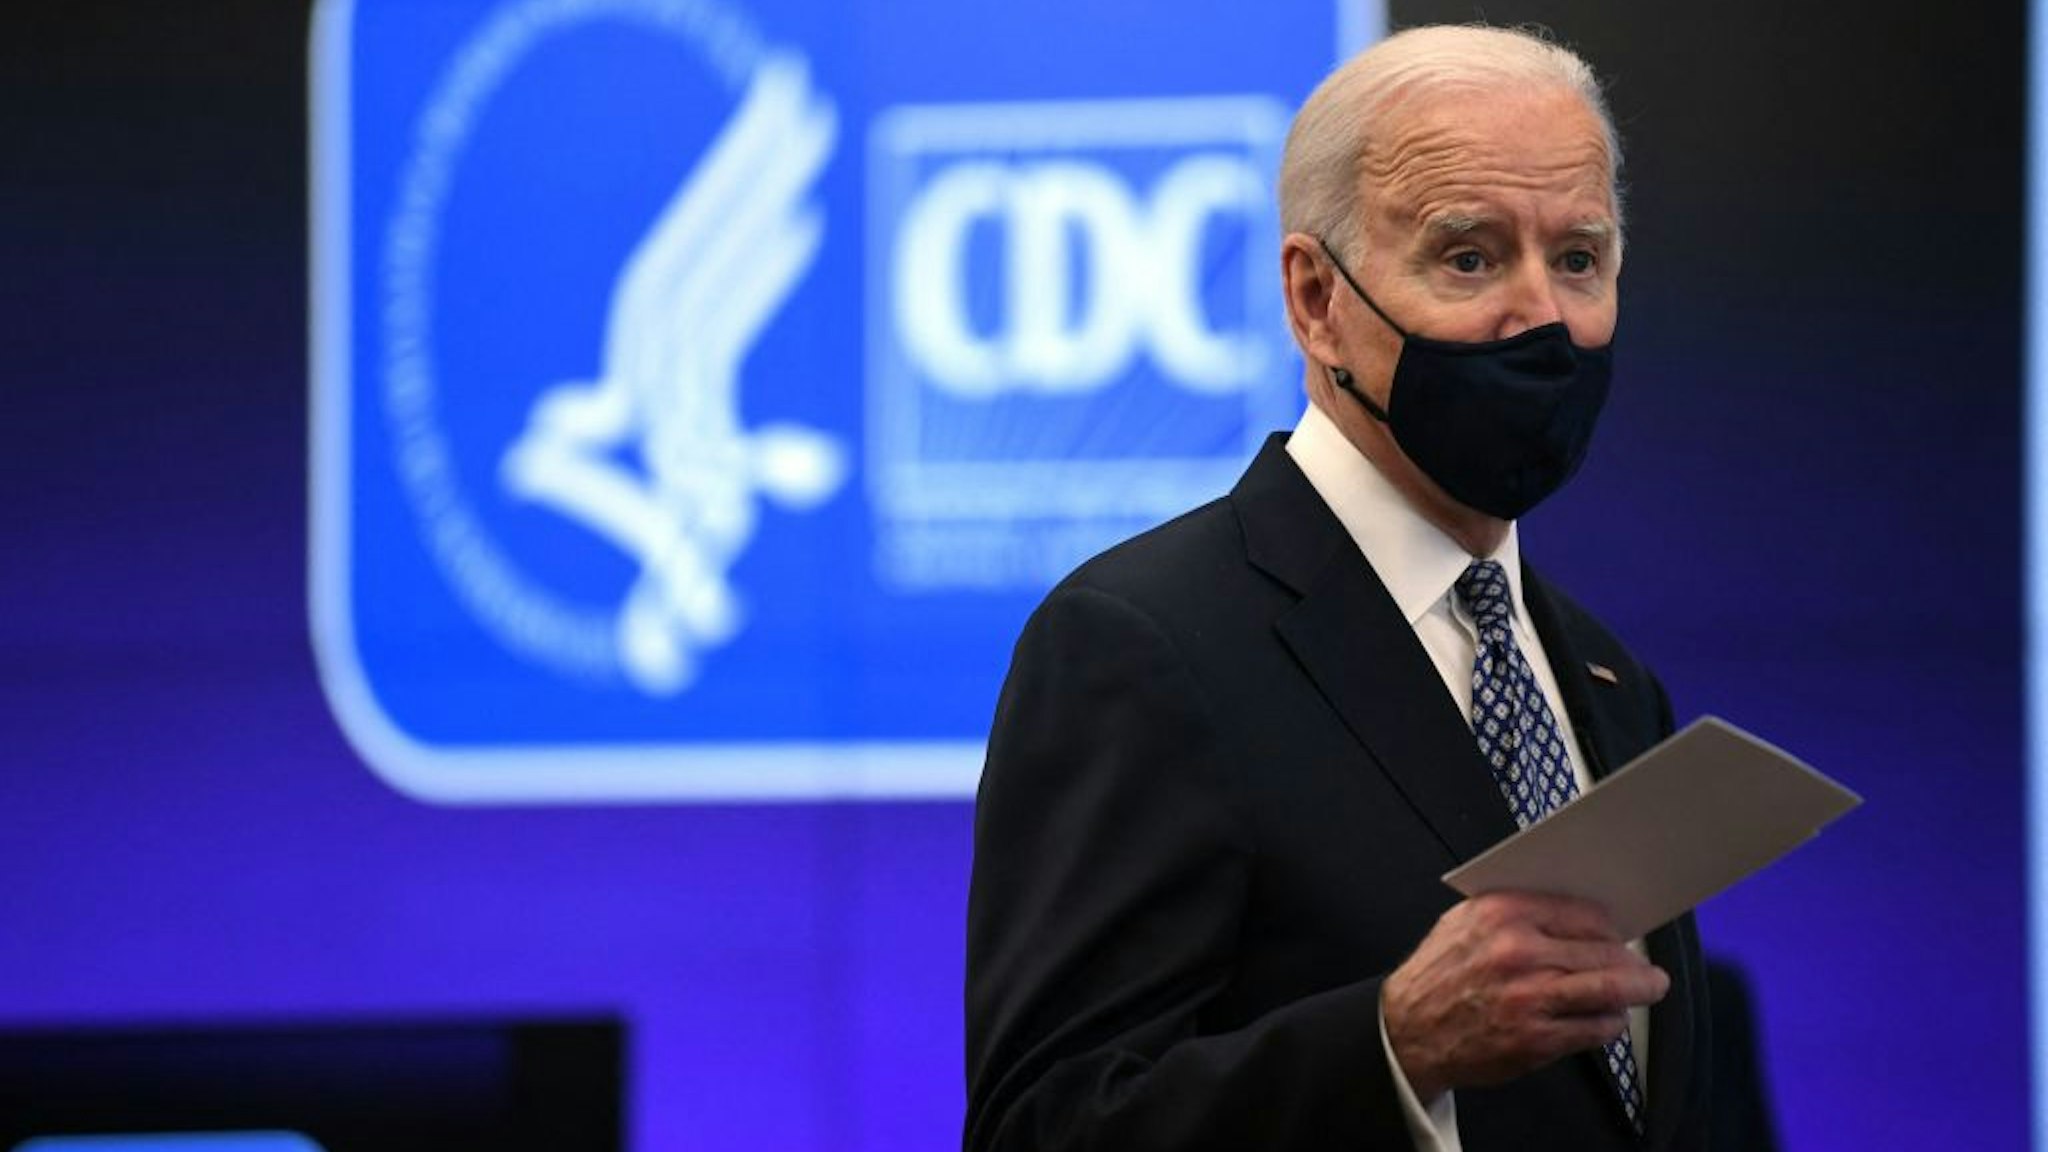 US President Joe Biden speaks as he tours the Centers for Disease Control and Prevention in Atlanta, Georgia, on March 19, 2021. (Photo by Eric BARADAT / AFP) (Photo by ERIC BARADAT/AFP via Getty Images)